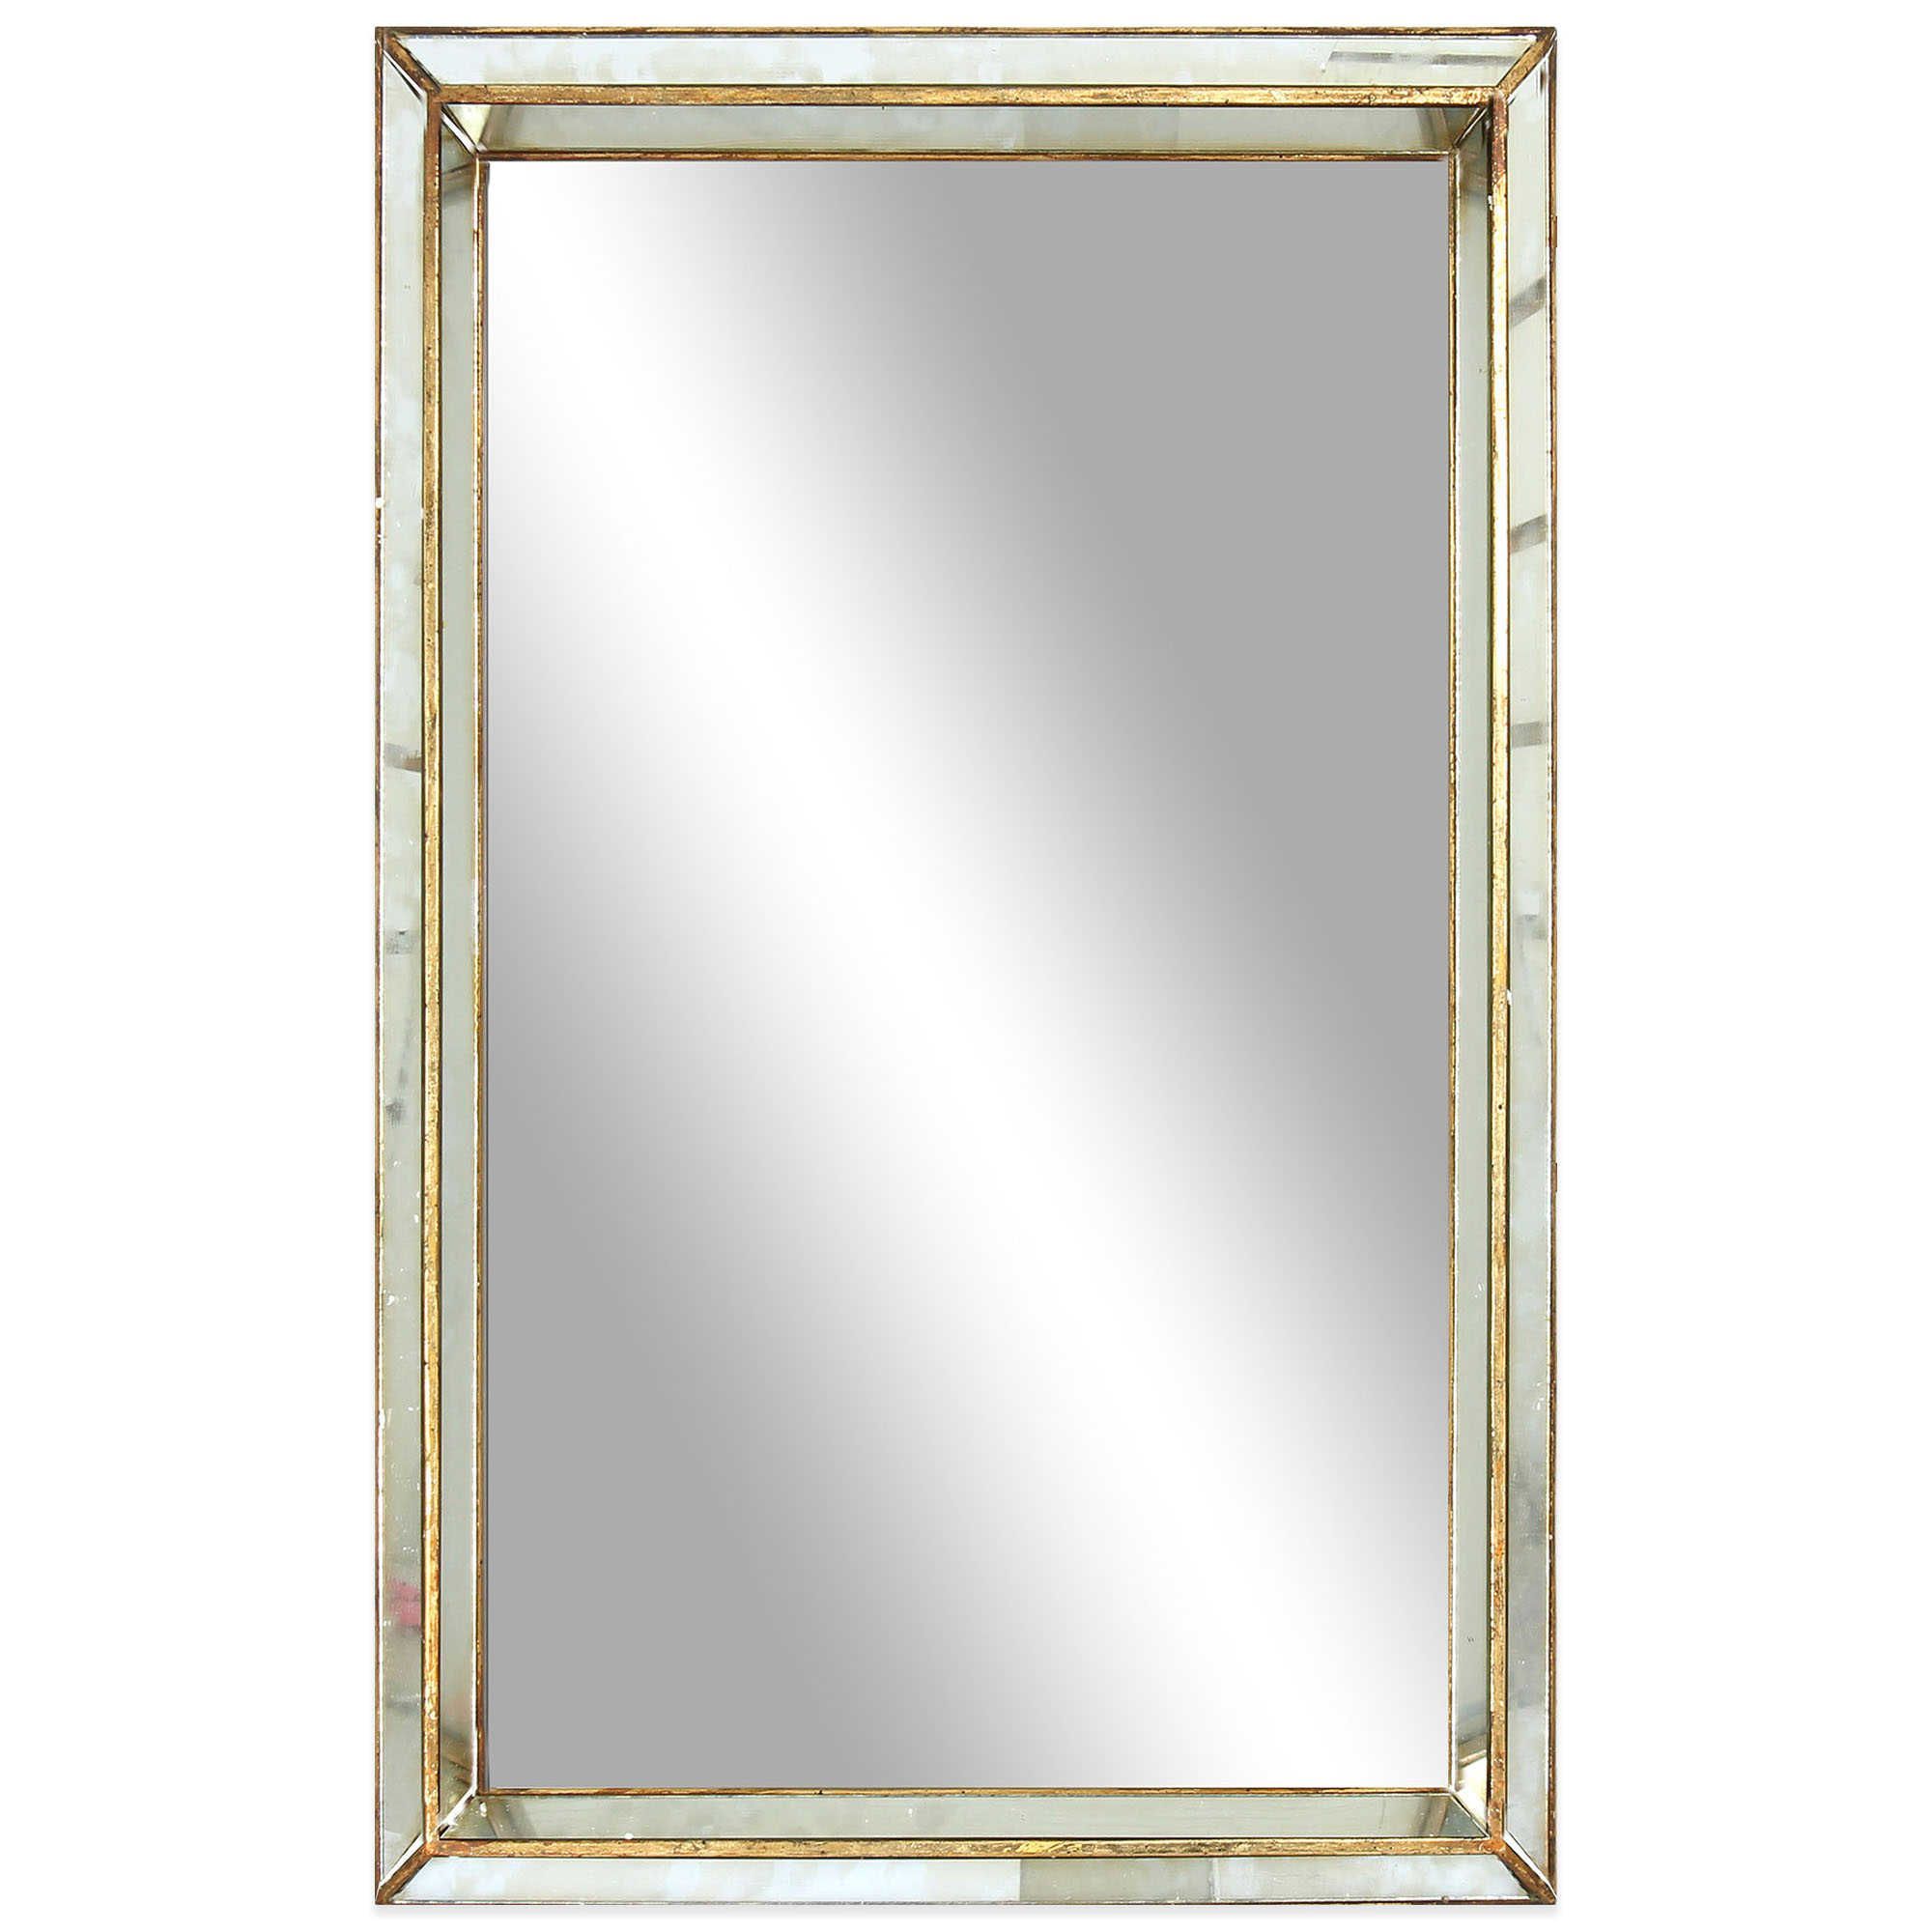 Invalid Url | Antique Gold Mirror, Large Mirror, Rectangular Mirror For Rectangle Antique Galvanized Metal Accent Mirrors (View 7 of 15)